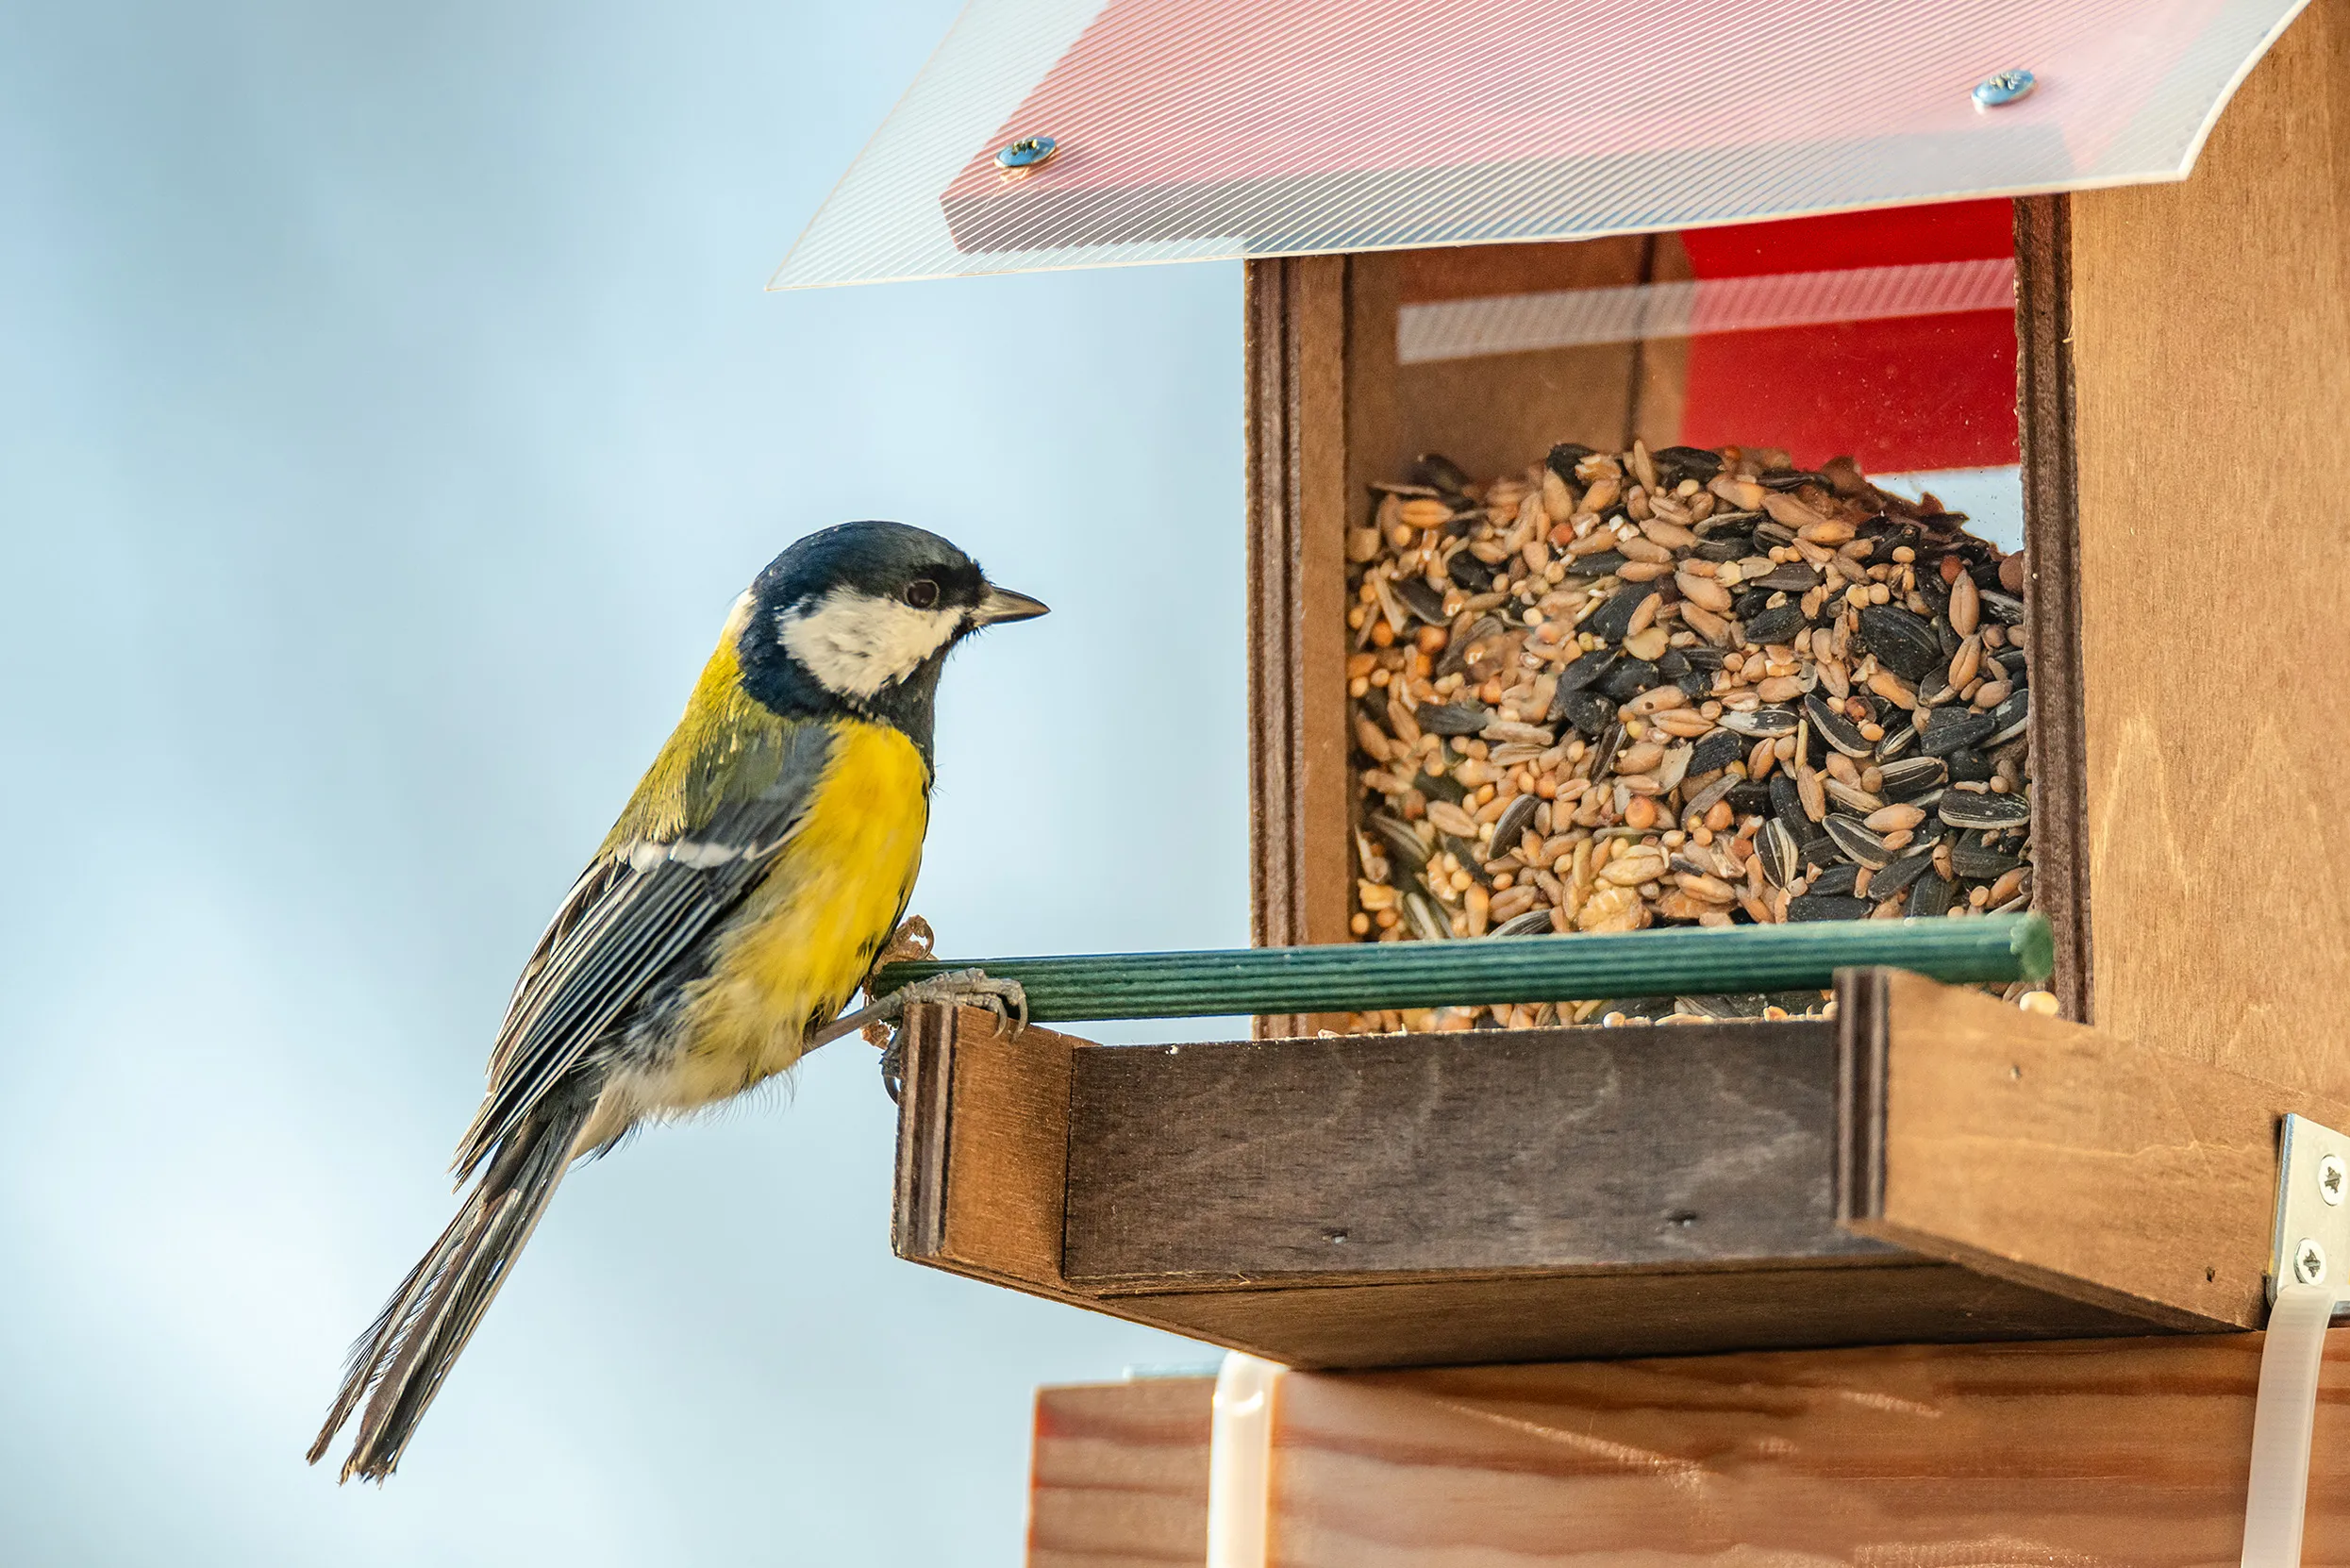 Great Tit perched on a domestic bird feeder.